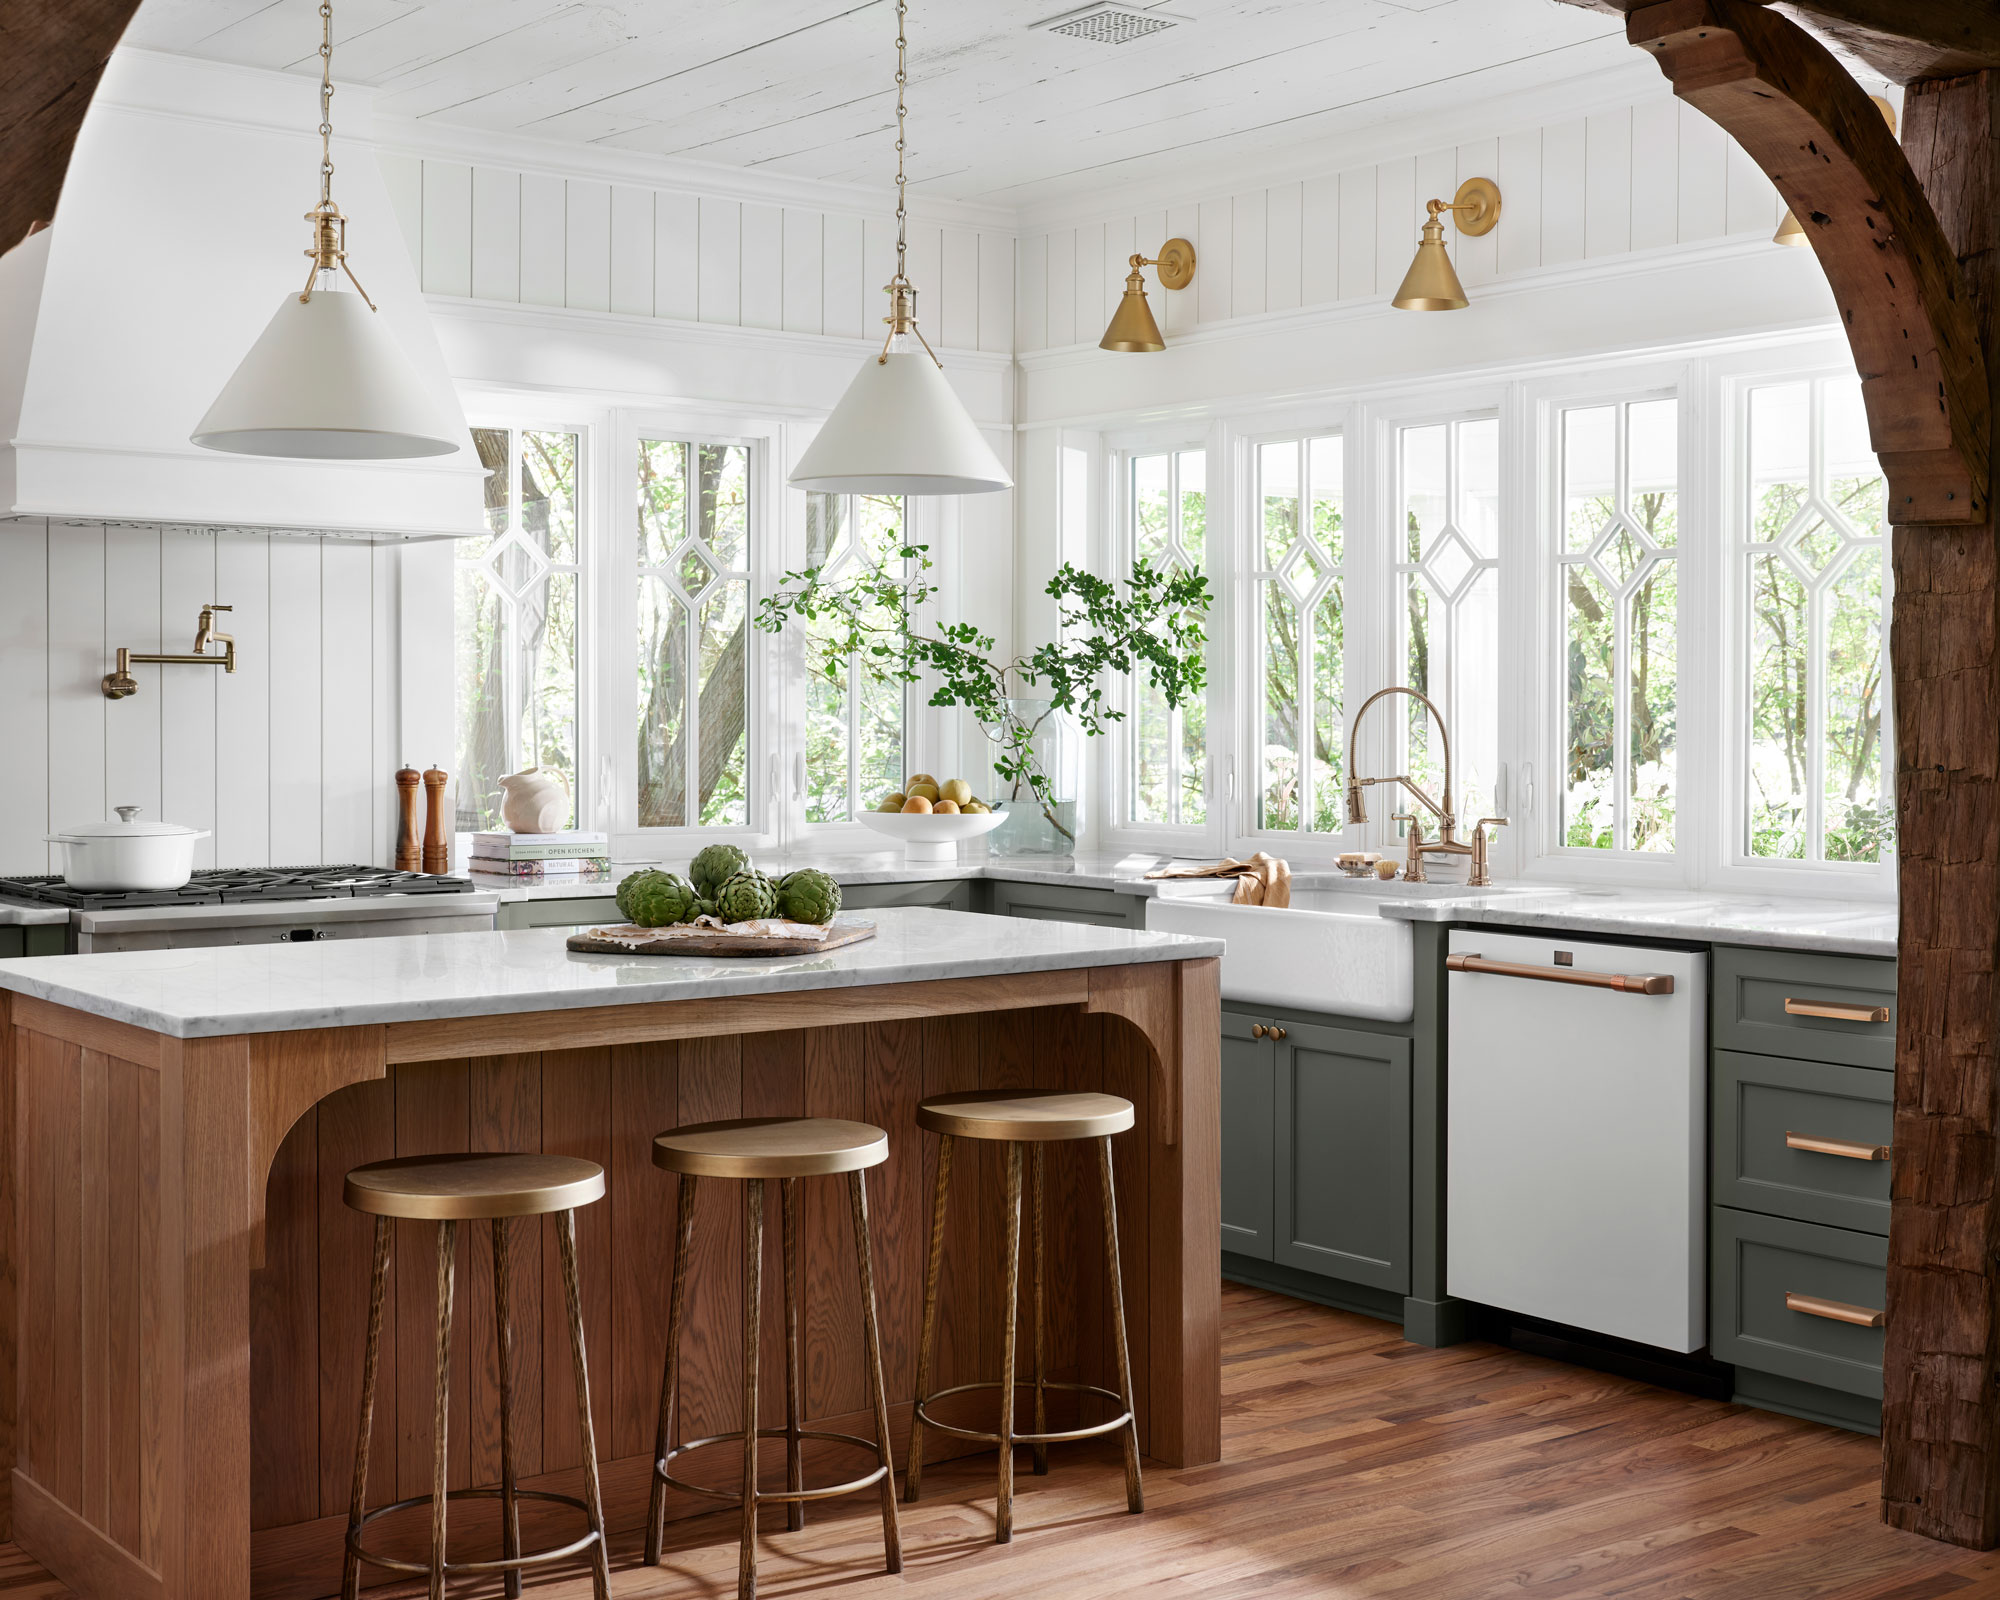 Is the shiplap trend going out of fashion? Experts weigh in Real Homes